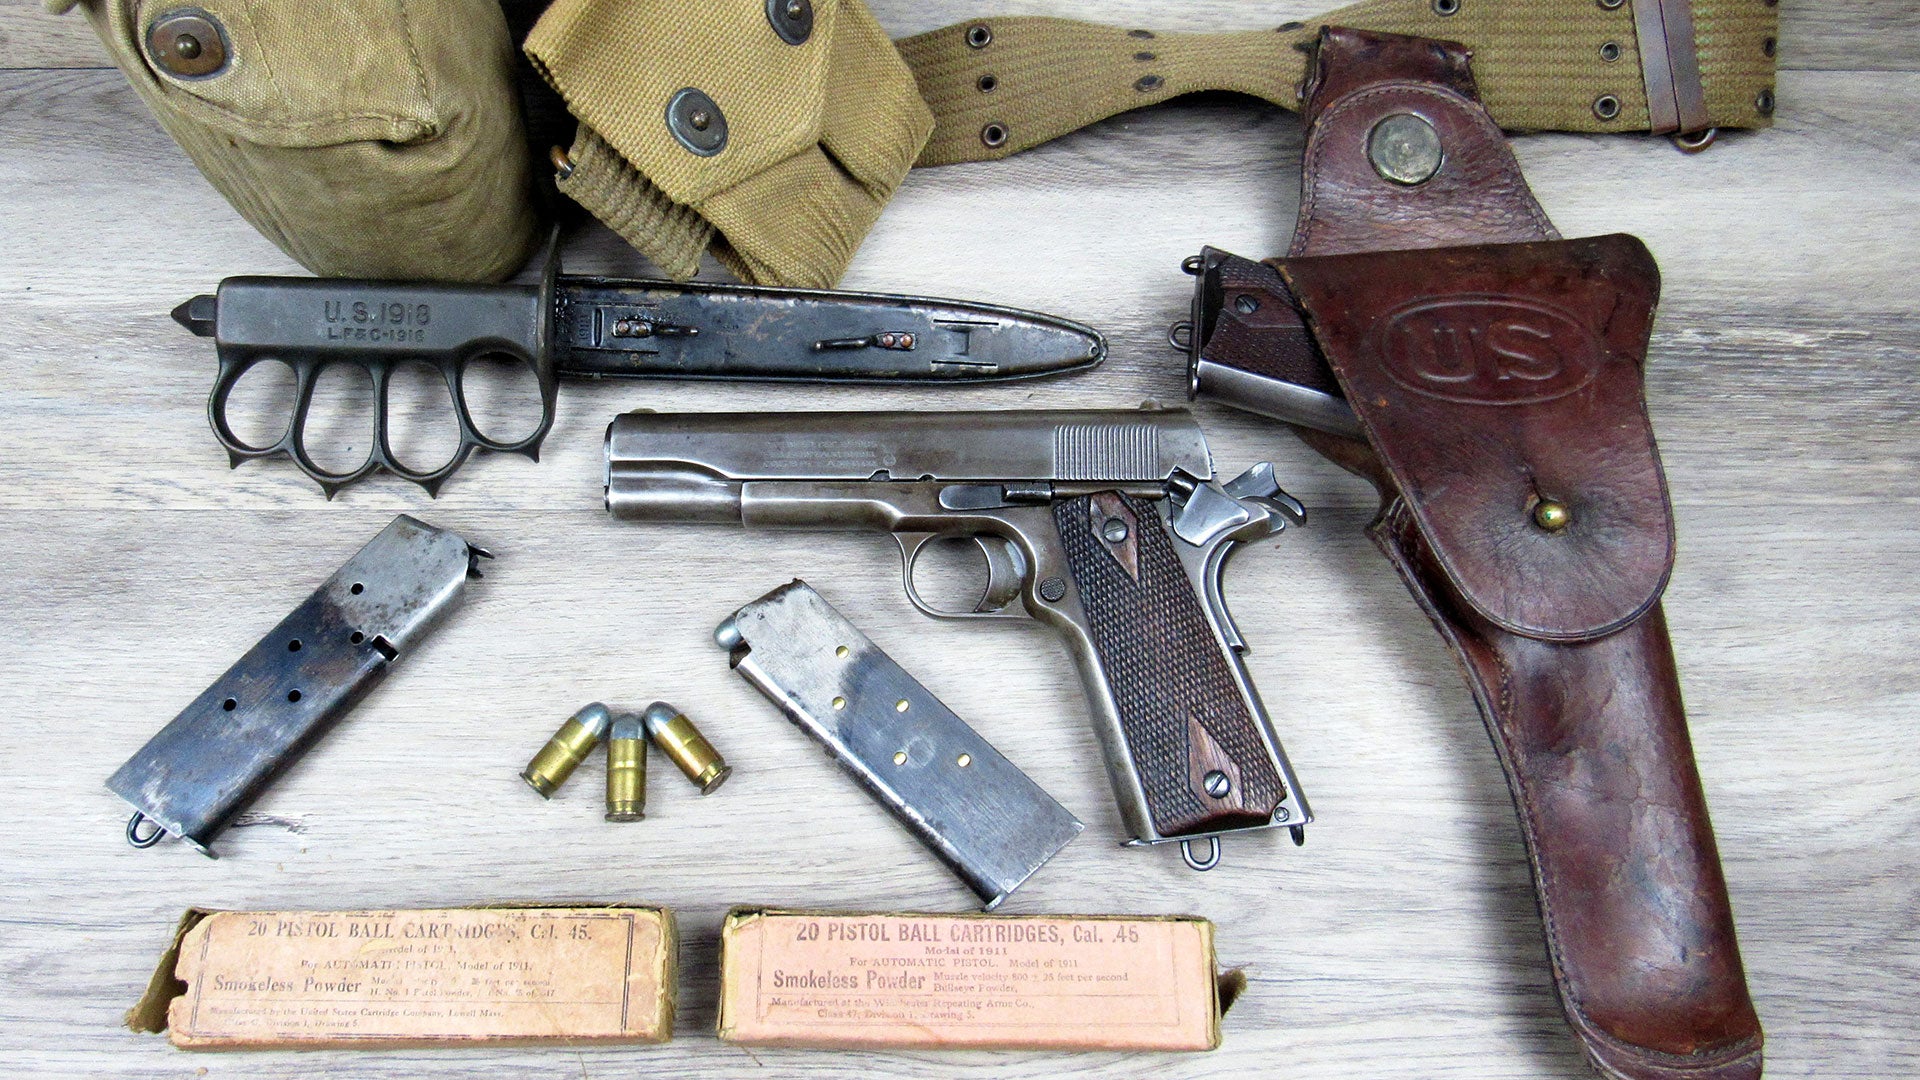 The 1911's Role in the Great War (World War I)